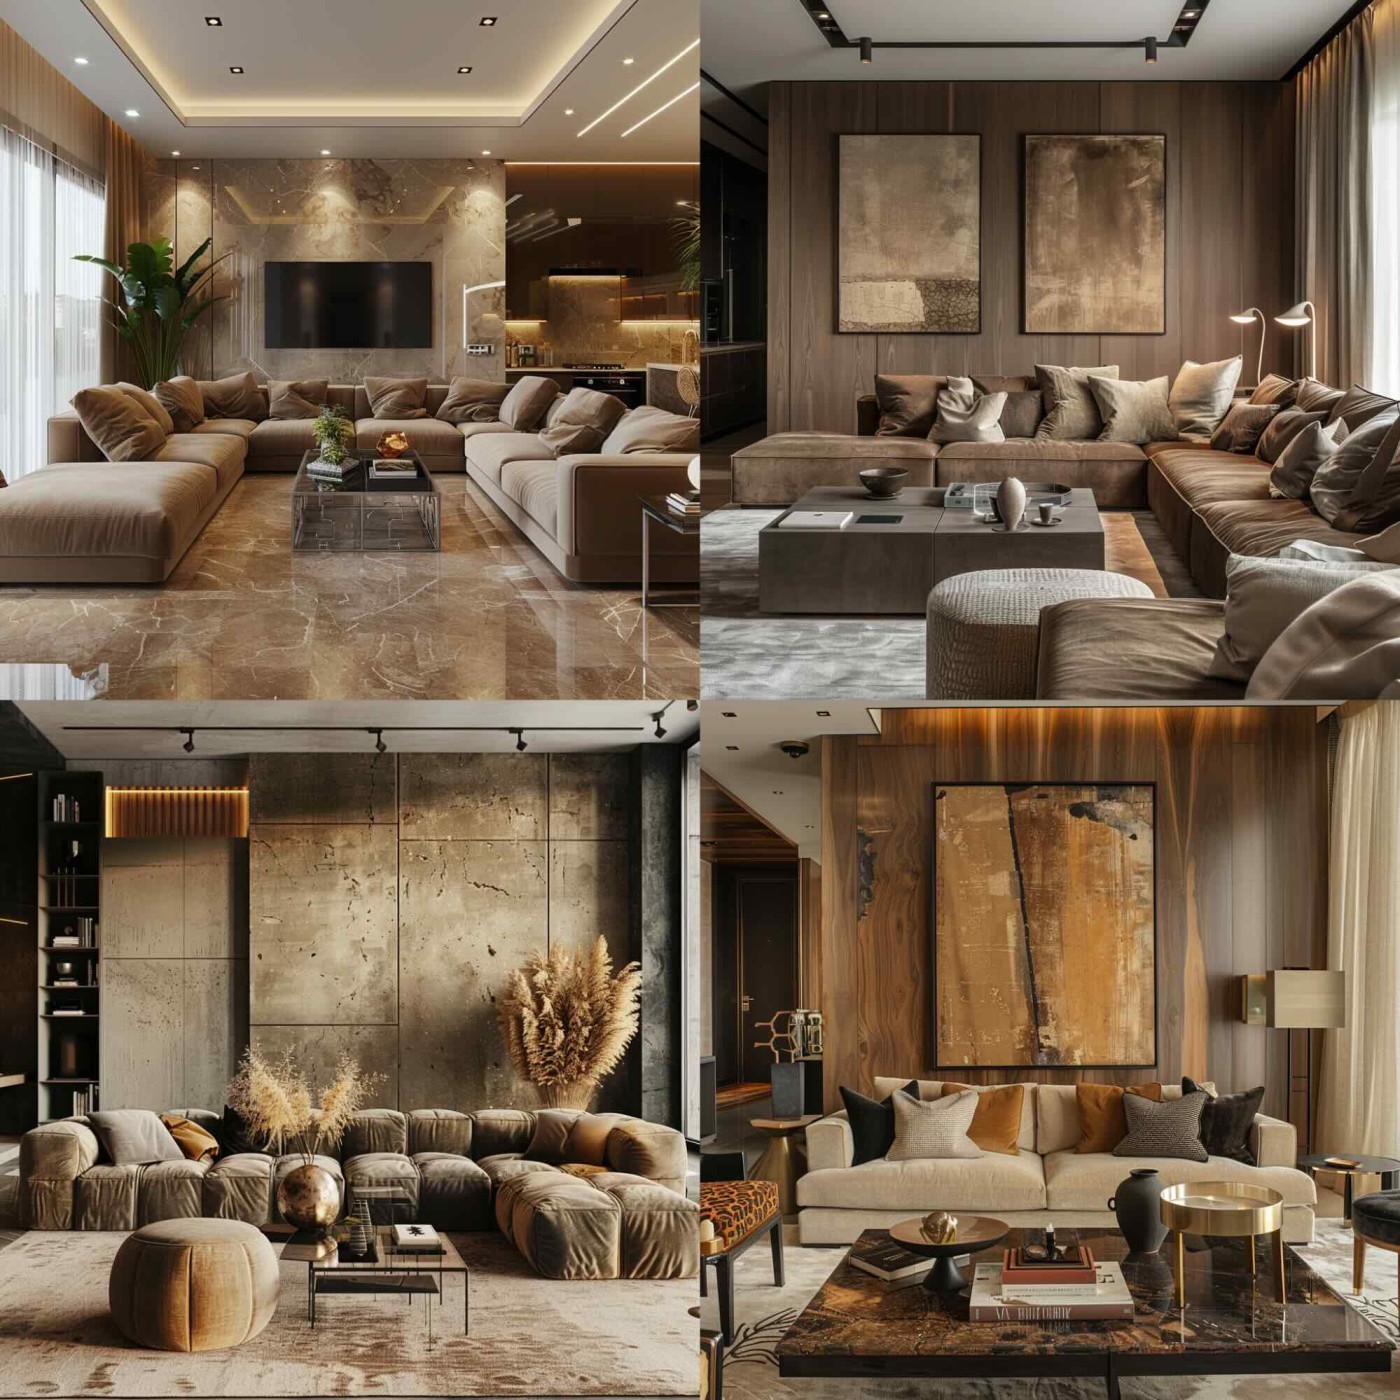 A living room in a luxury apartment, earth tones